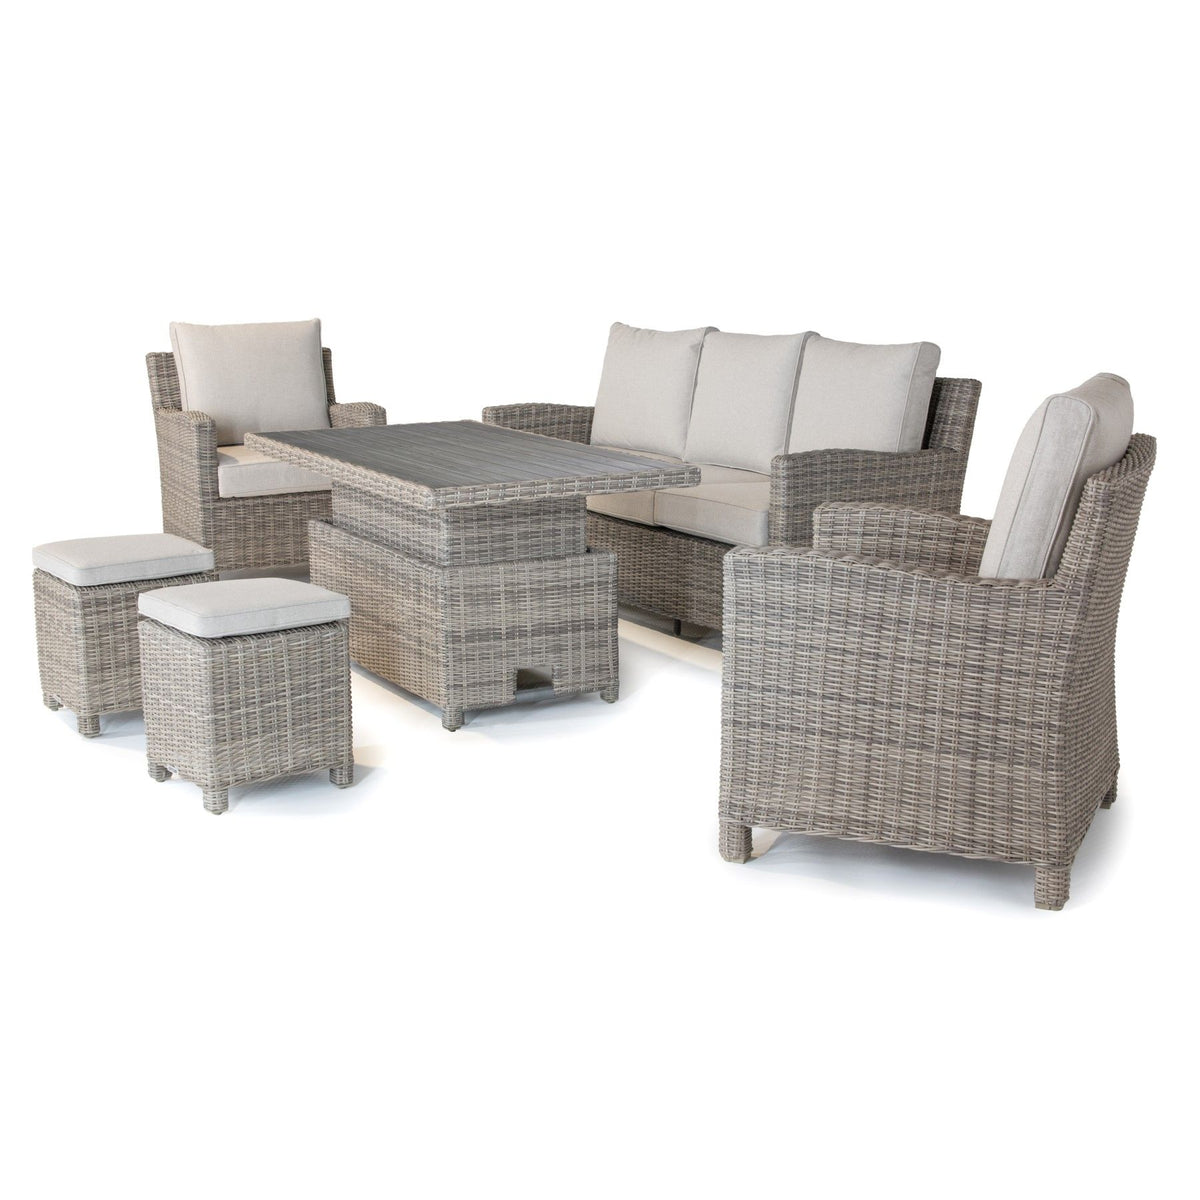 Kettler Palma Signature Oyster Wicker Outdoor Lounge Sofa Set with High Low Slat Top Table